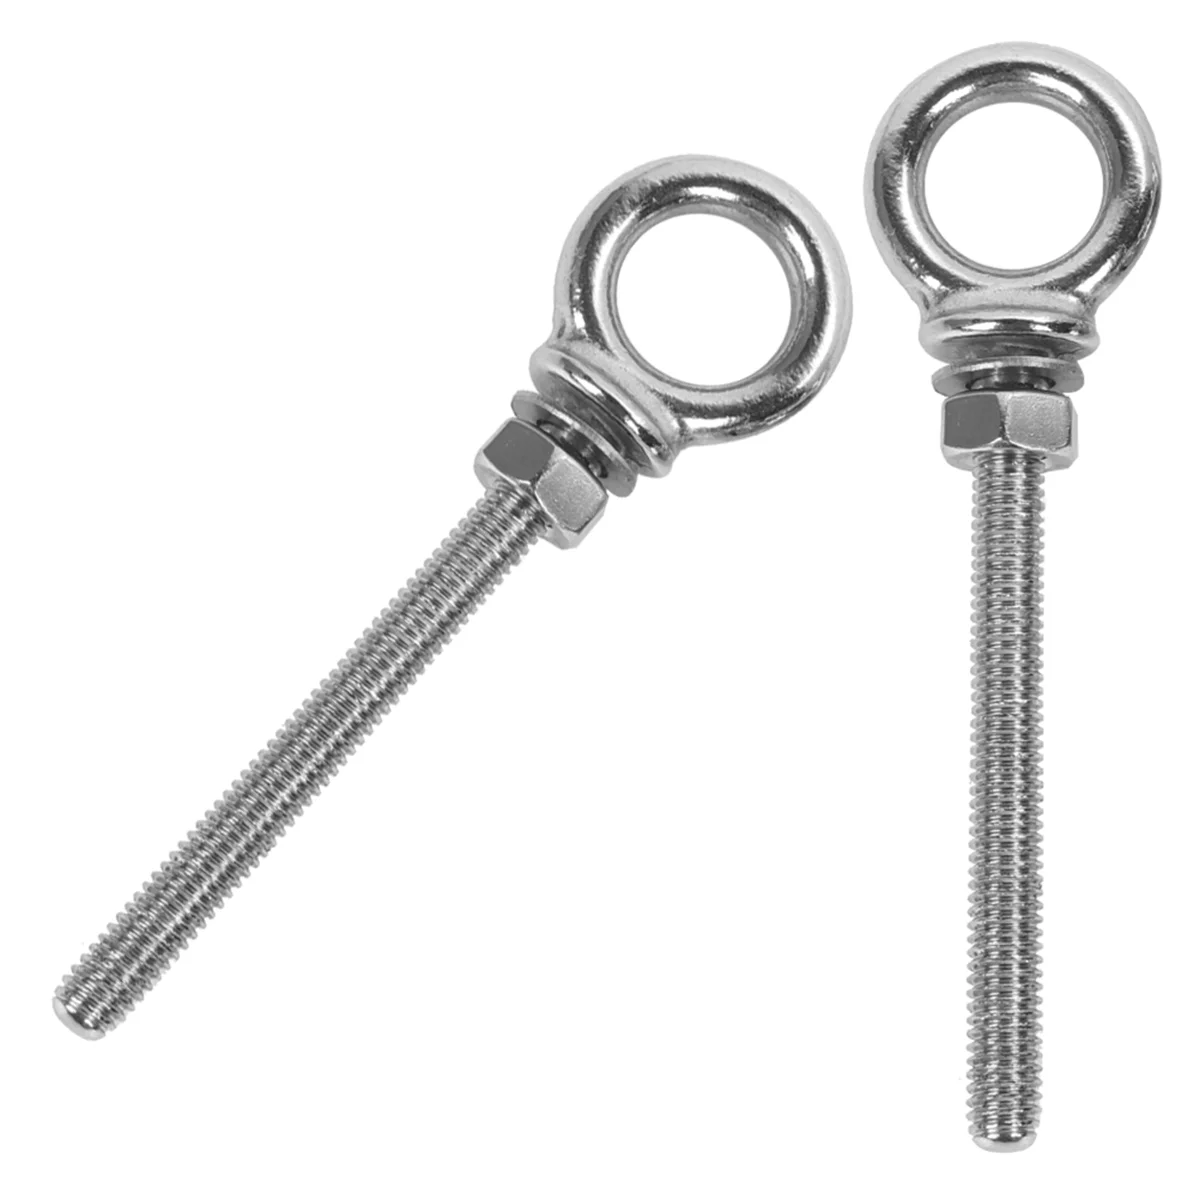 

Eye Bolt Bolts Ring Stainless Nuts Screw Lifting Hook Hooks Expansion Steel Eyebolts Screws Fasterners Eyebolt Machinery Duty